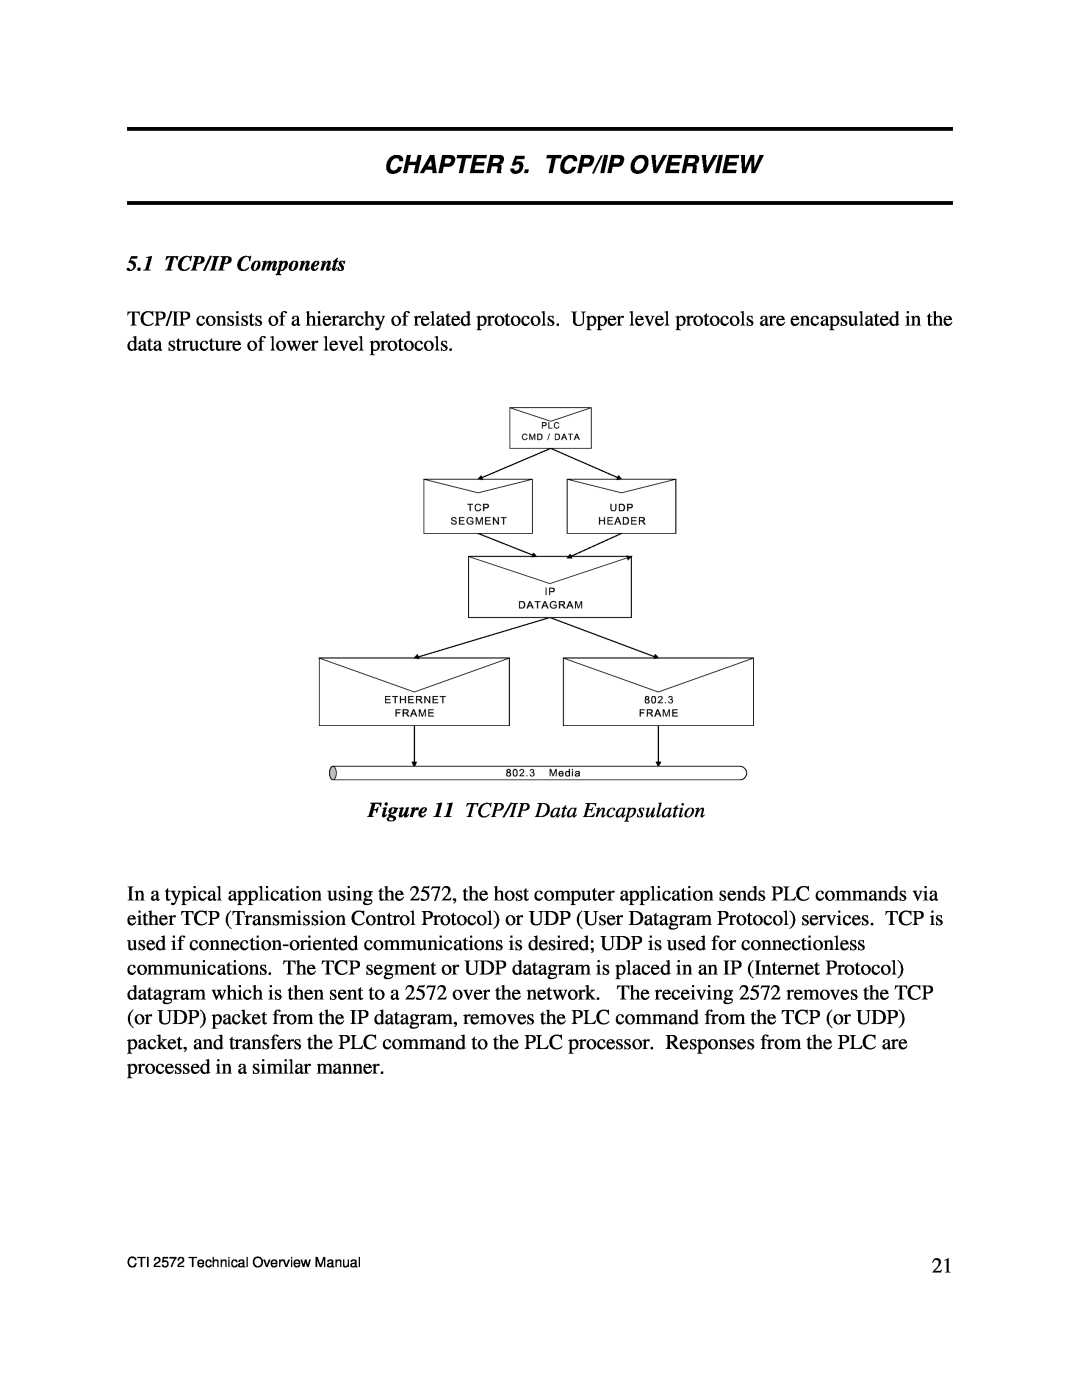 IBM CTI 2572 manual Tcp/Ip Overview, 5.1 TCP/IP Components 